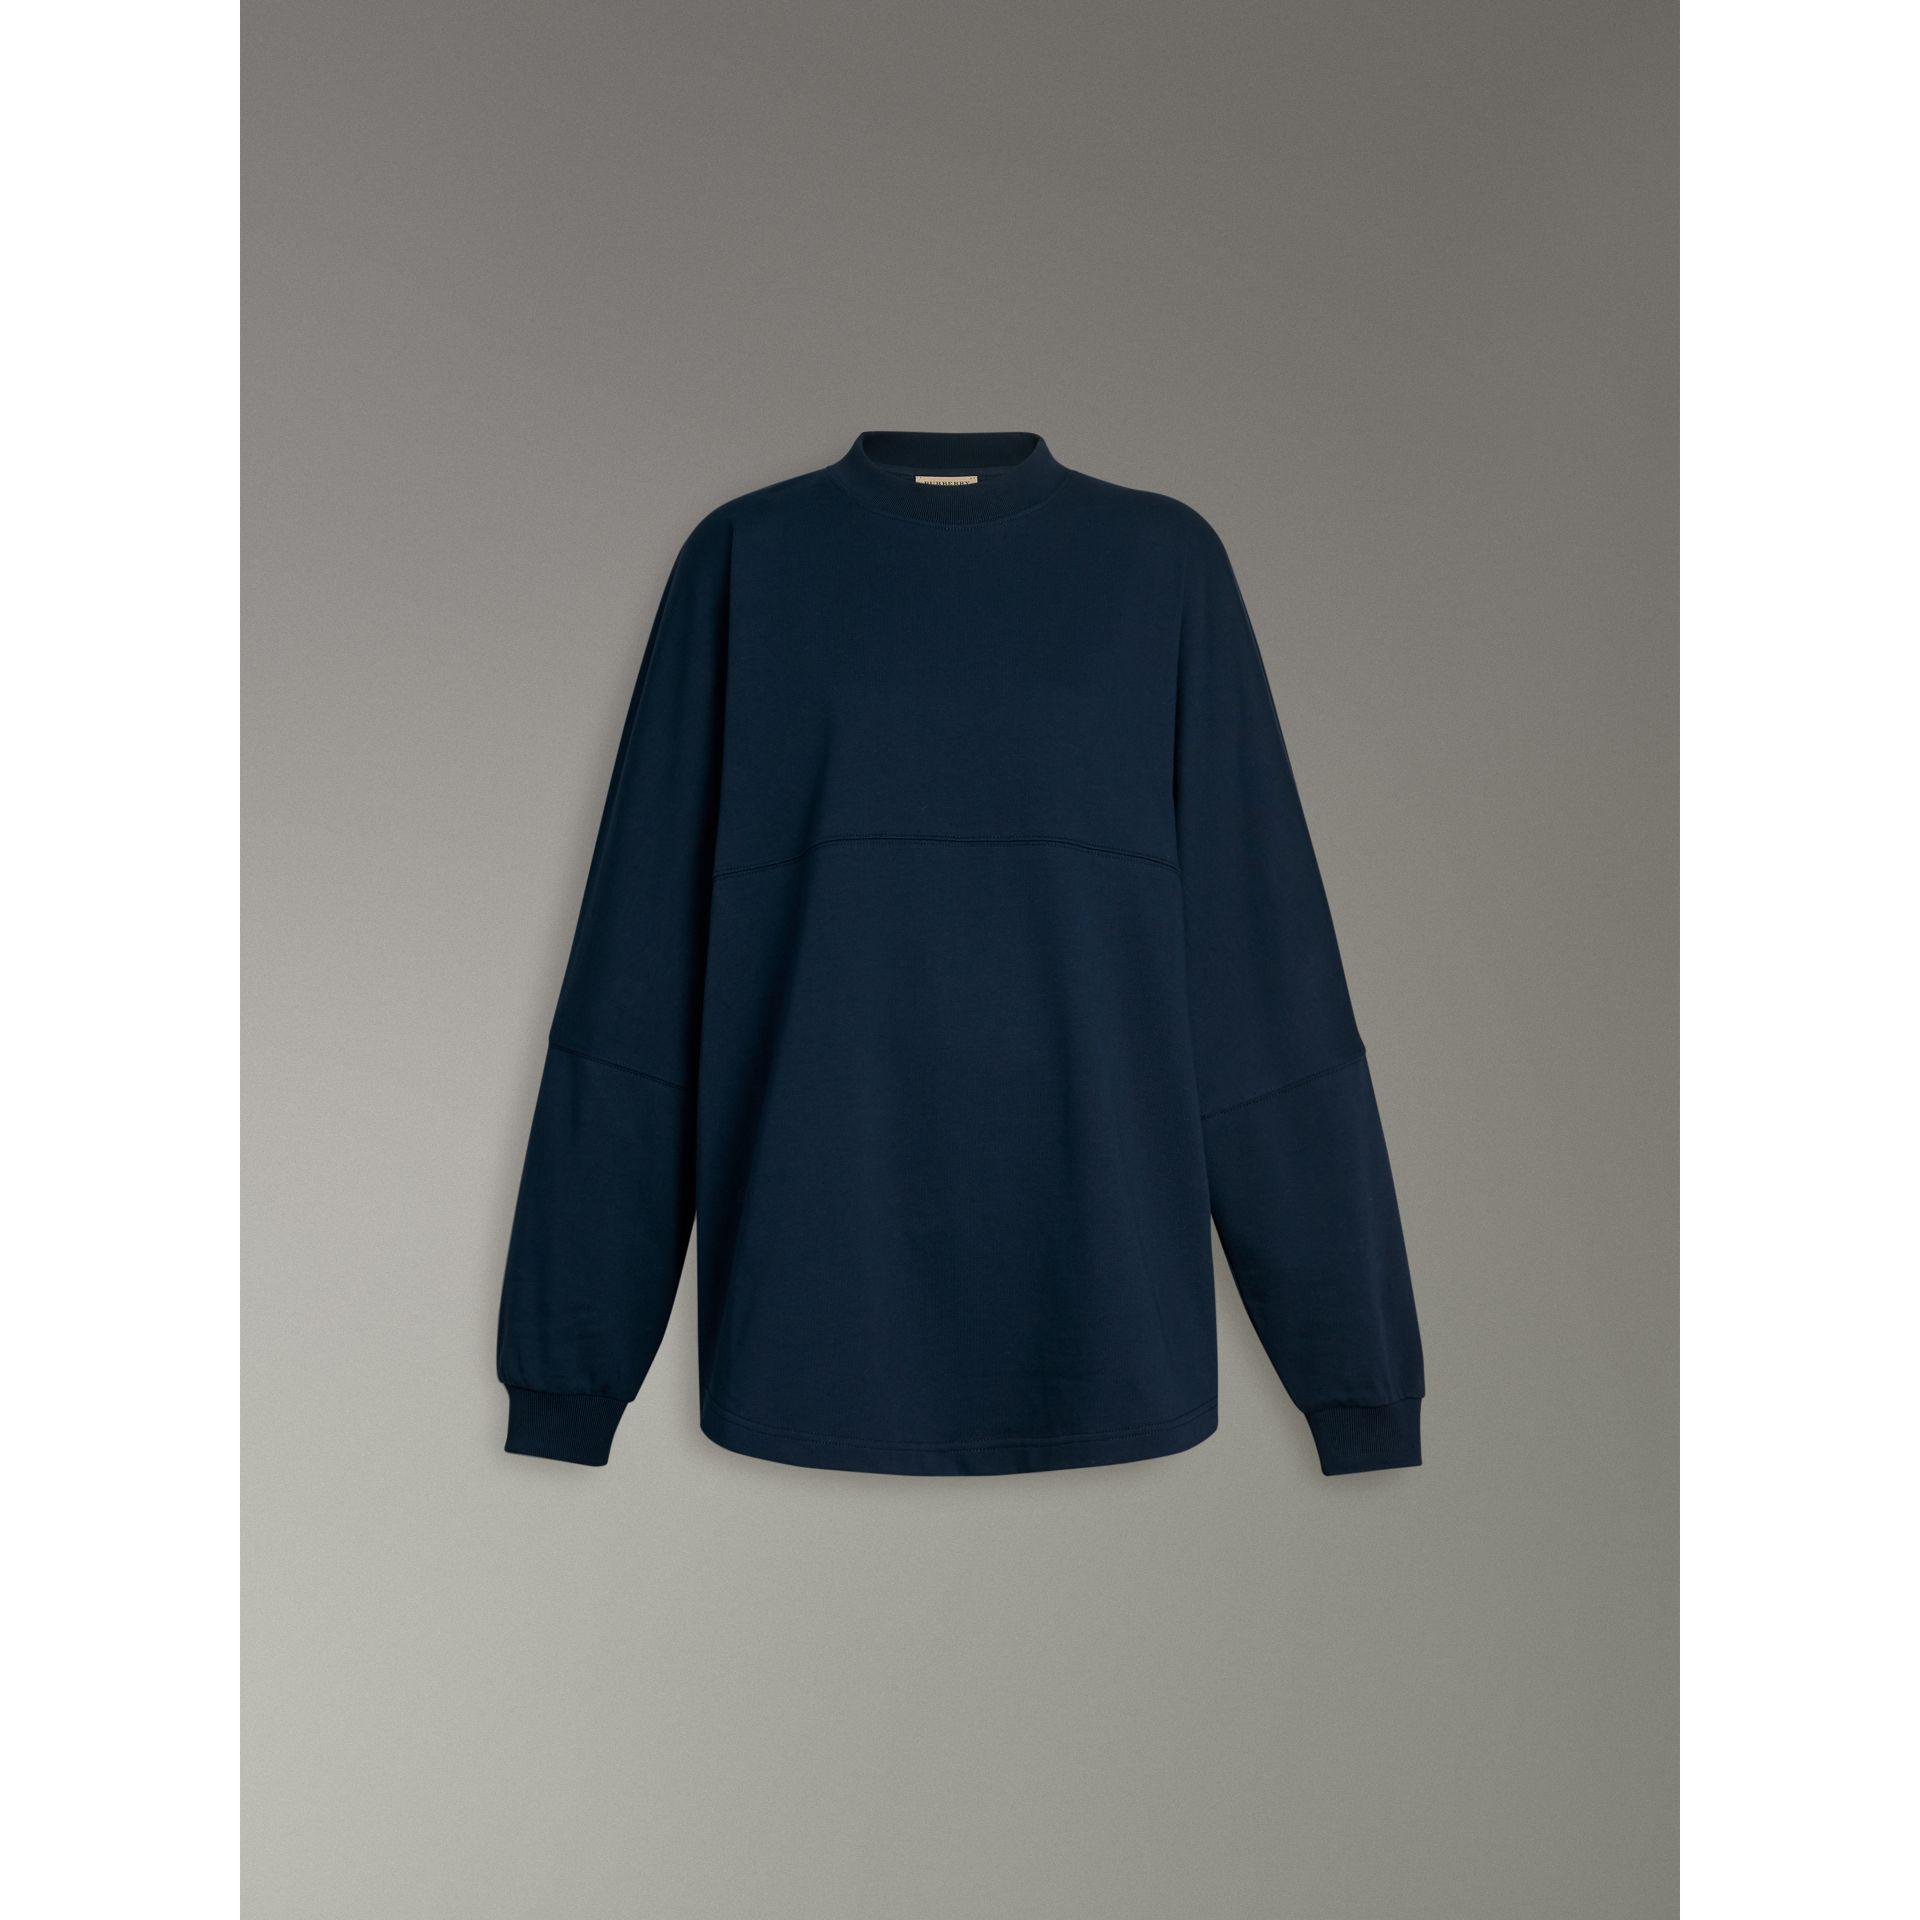 Burberry Logo Print Cotton Oversized Top in Navy (Blue) | Lyst